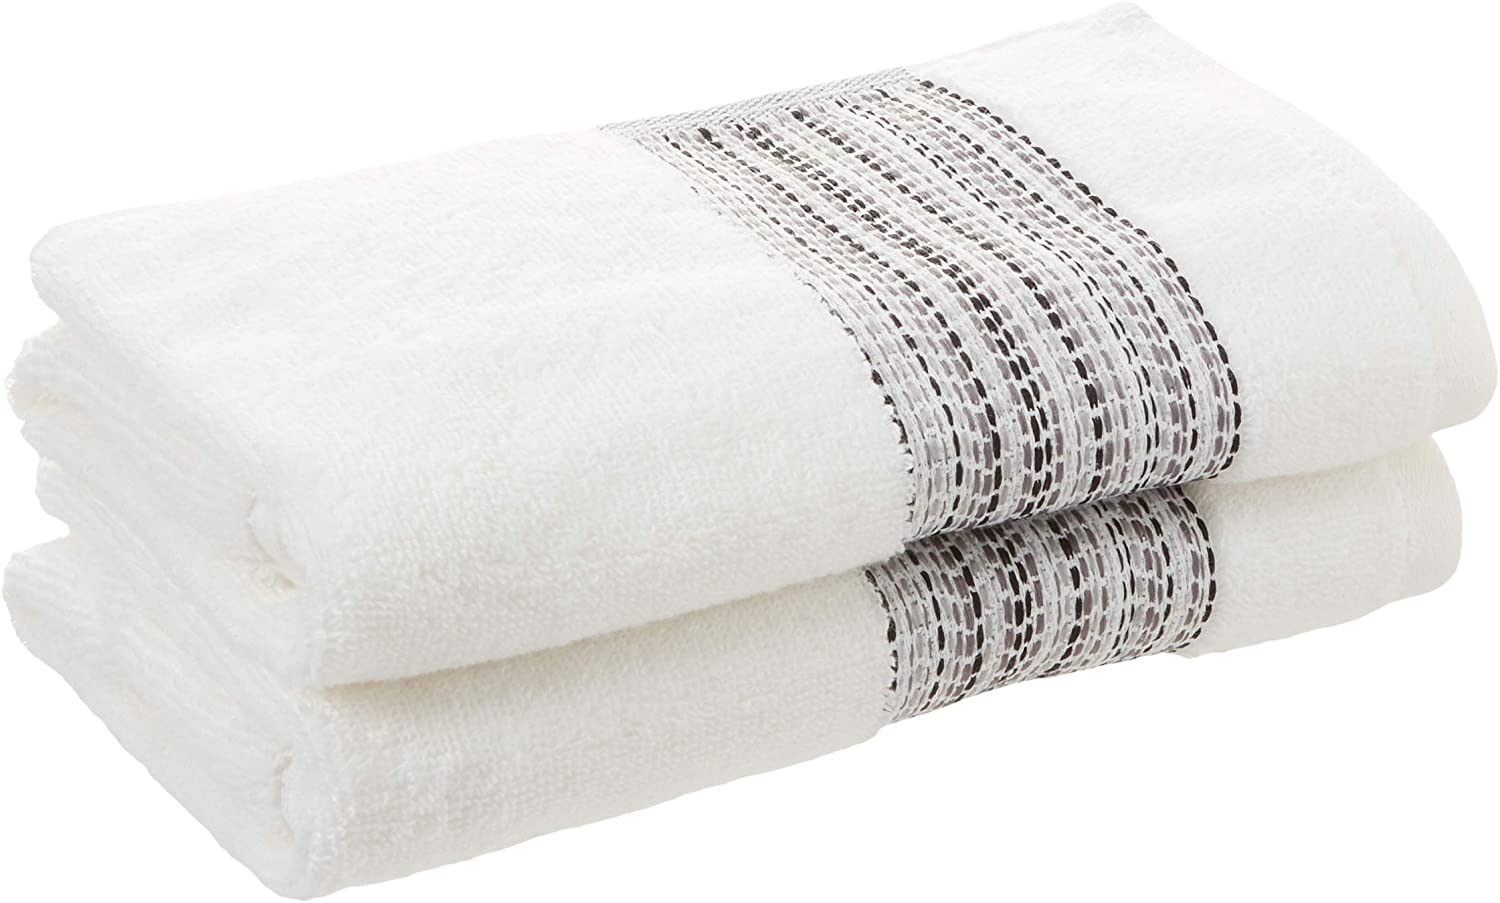 two fluffy white towels with gray and beige designs